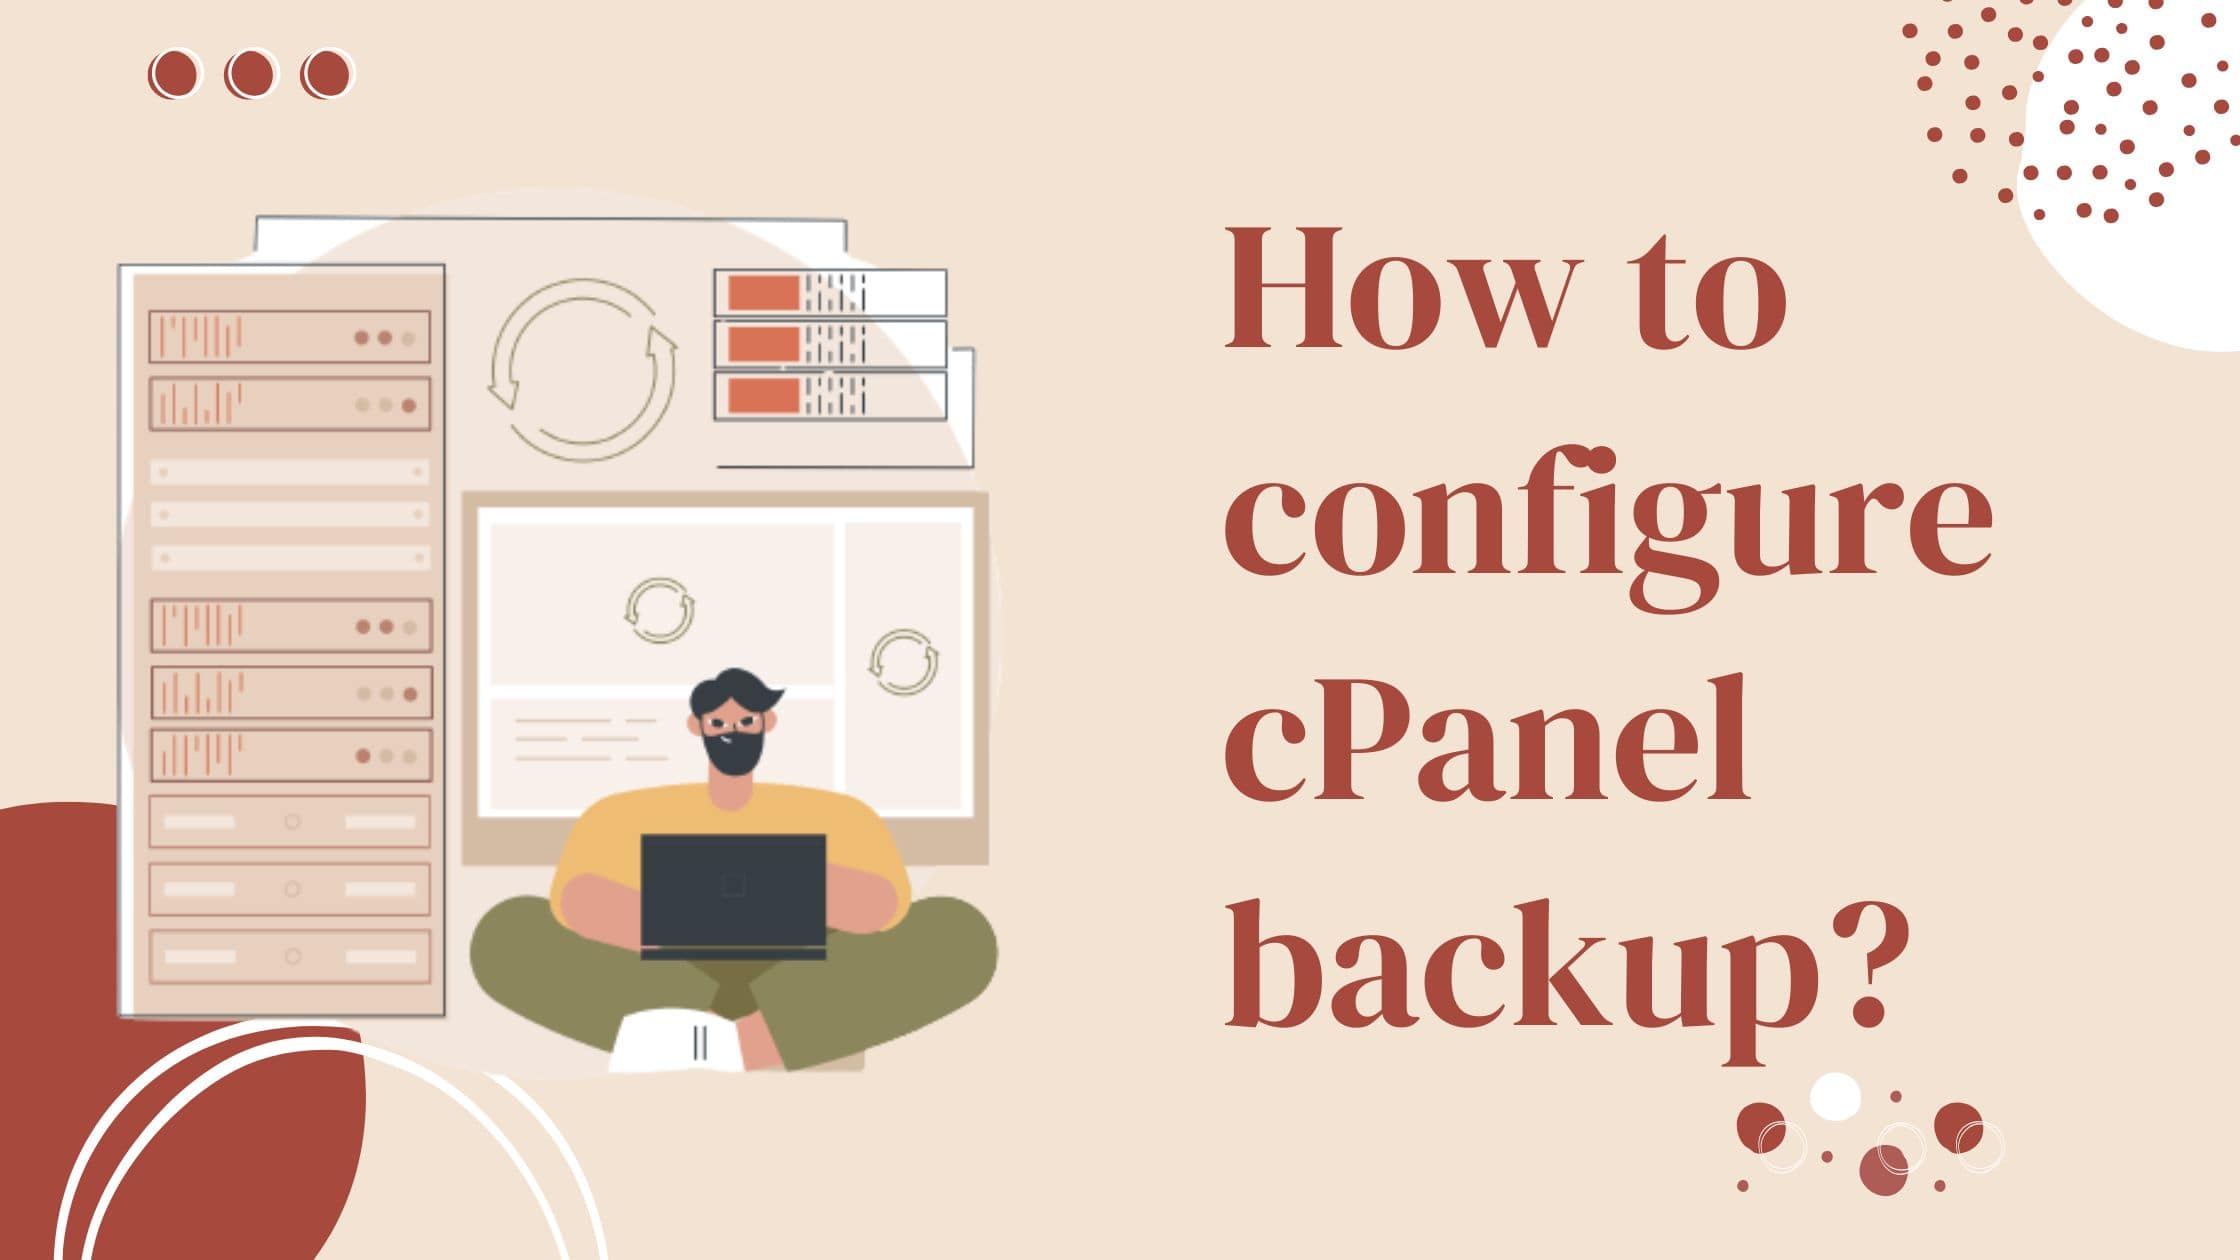 How to configure cPanel backup?